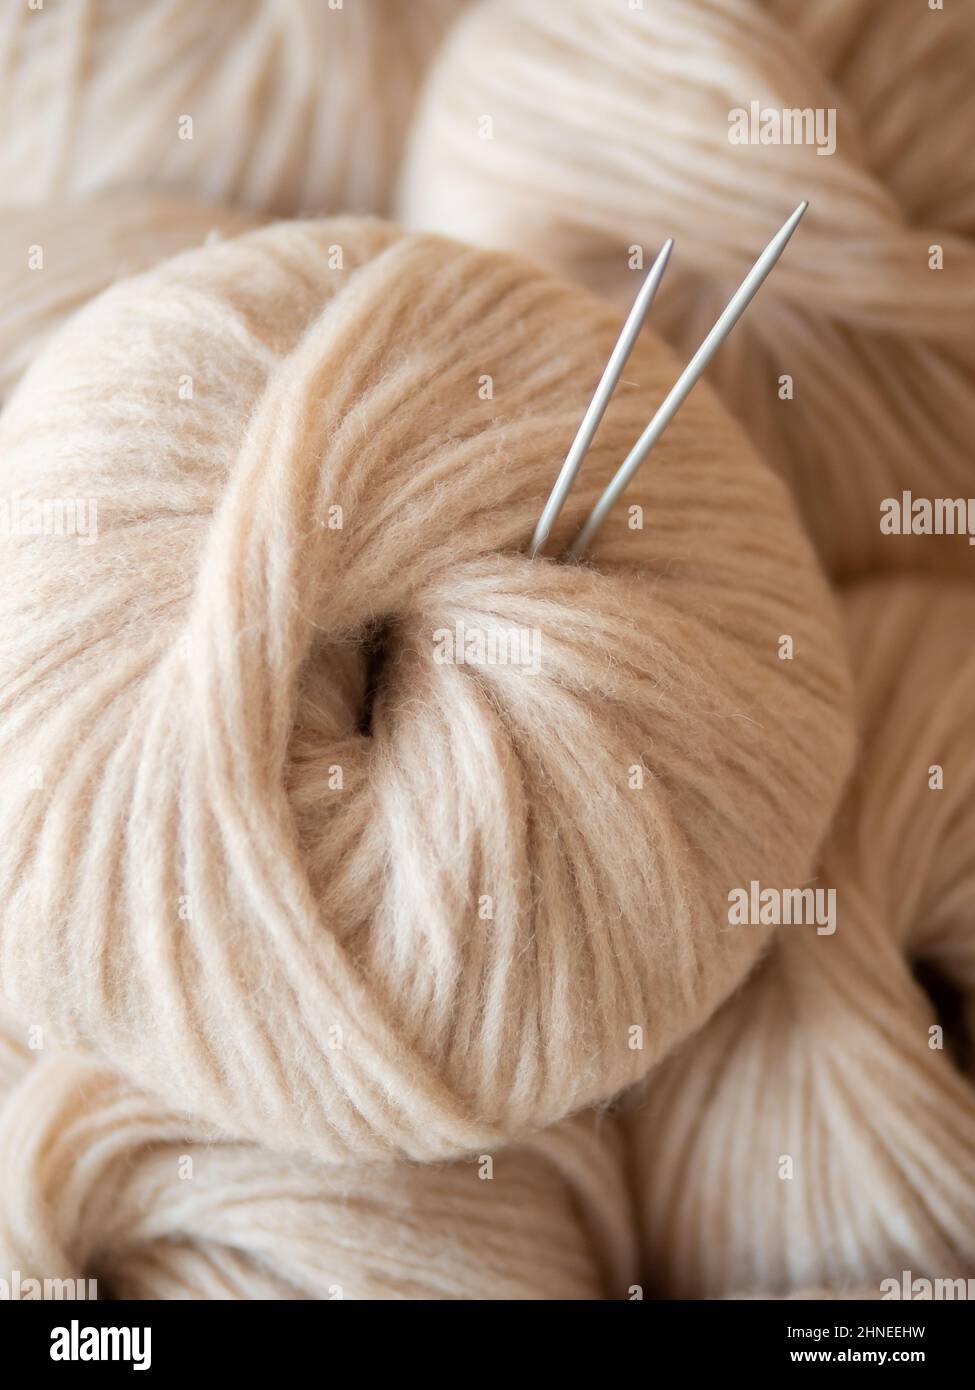 Knitted fabric of very thick yarn. A big tangle. The background is